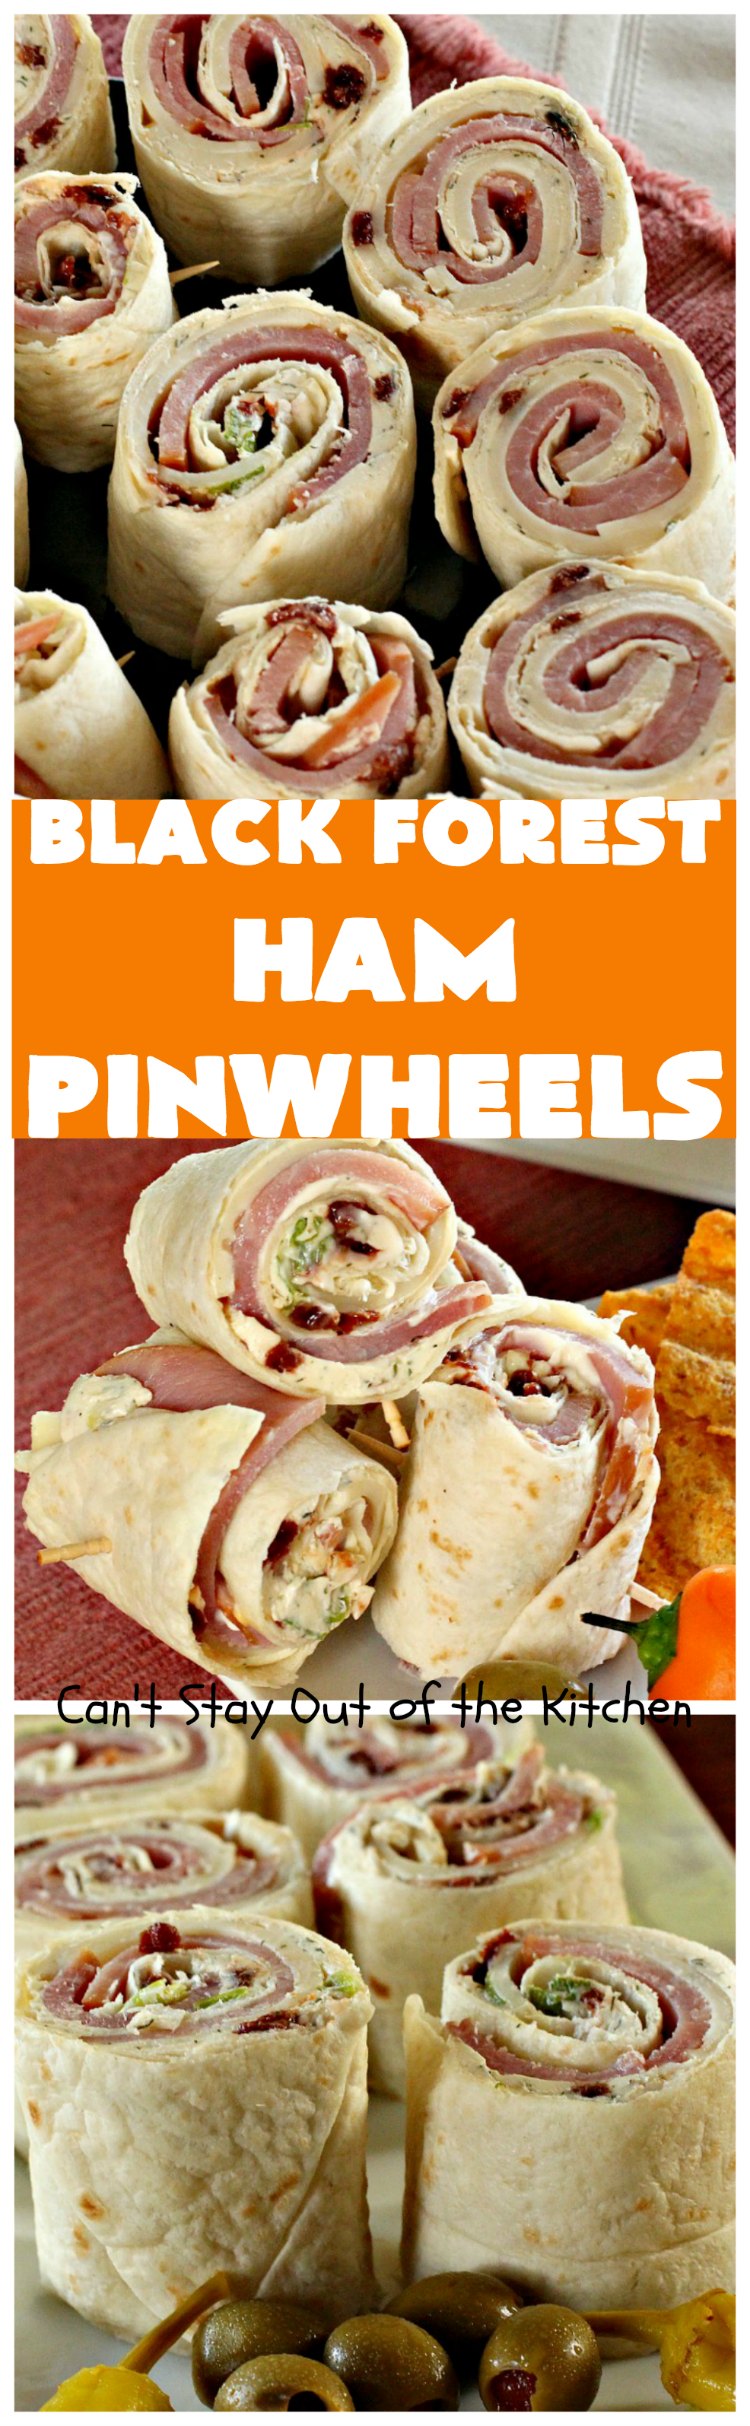 Black Forest Ham Pinwheels | Can't Stay Out of the Kitchen